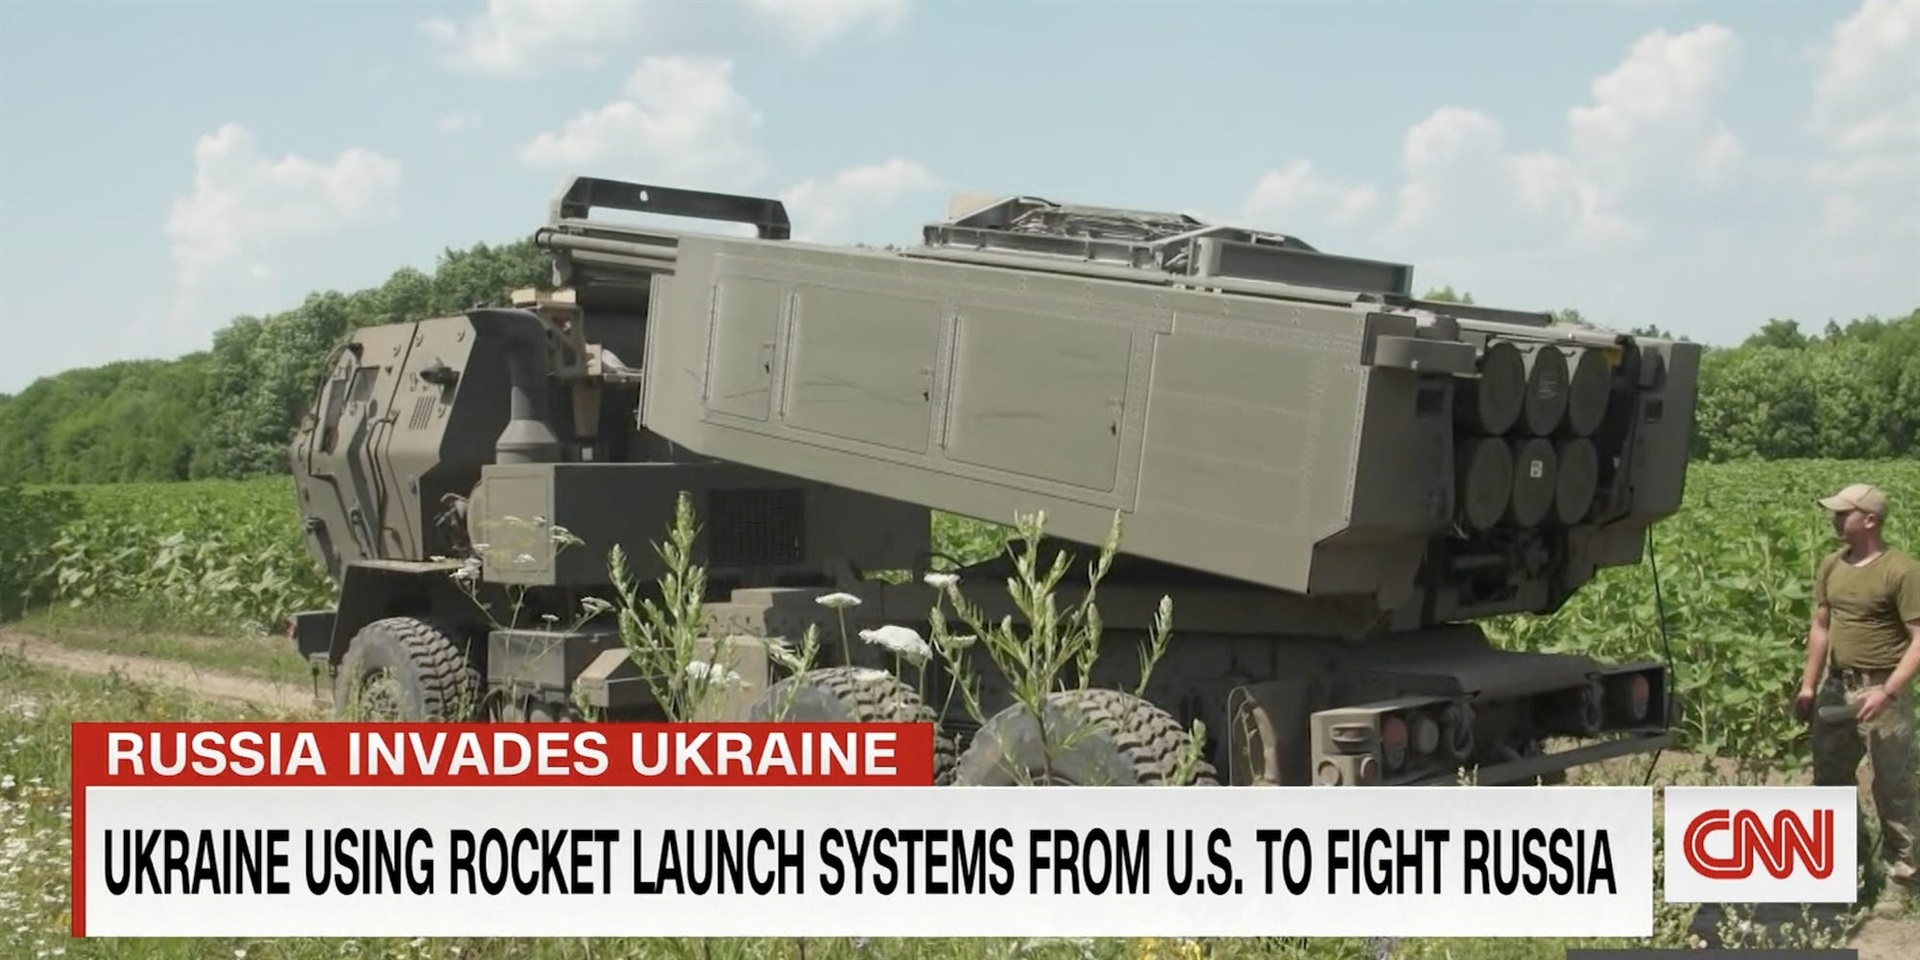 A still from CNN showing a US-donated HIMARS system in operation in Ukraine. CNN